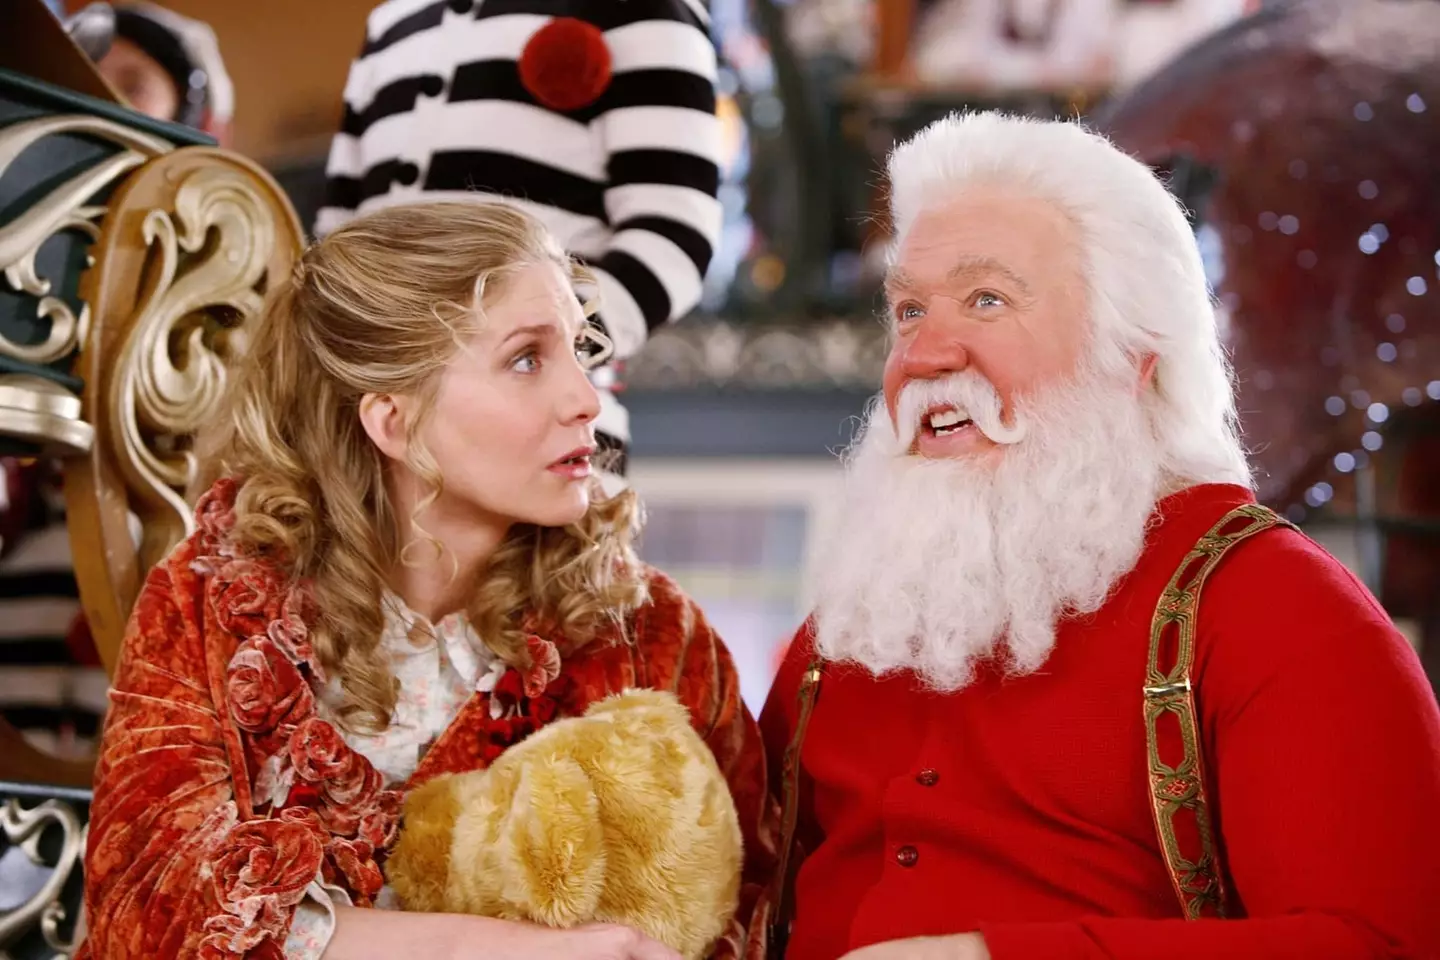 People would prefer for mommy to be kissing Mrs Claus instead of Santa Claus (